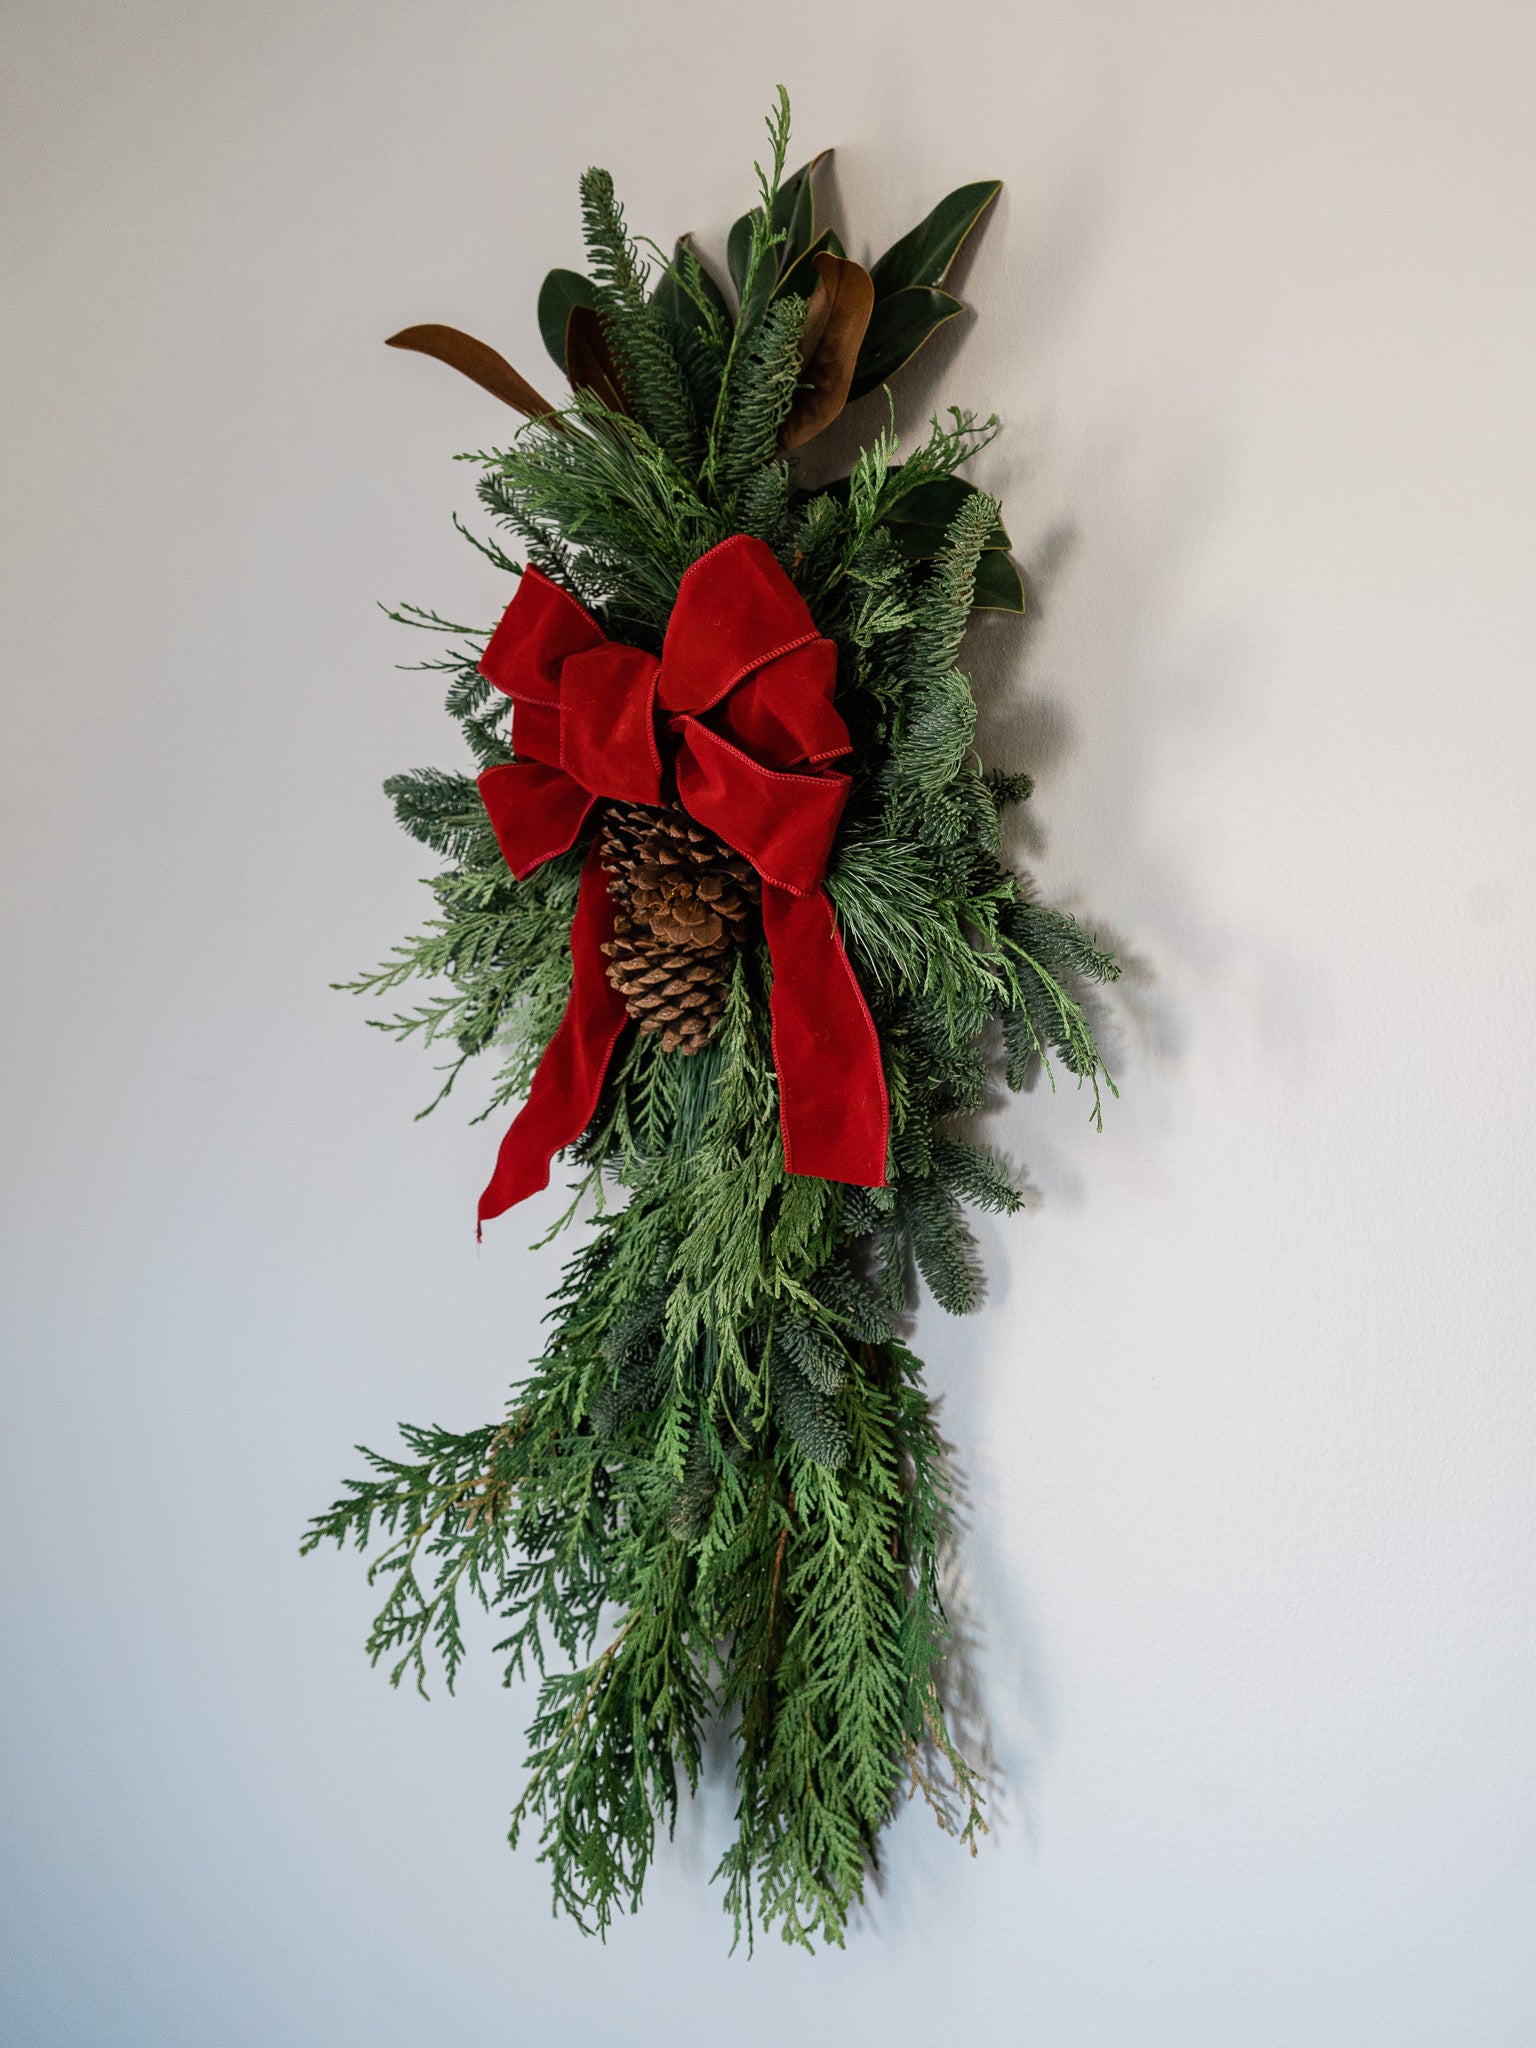 Holiday Garland/Mailbox Swag Workshop Tuesday, December 5th 6pm-7:30pm